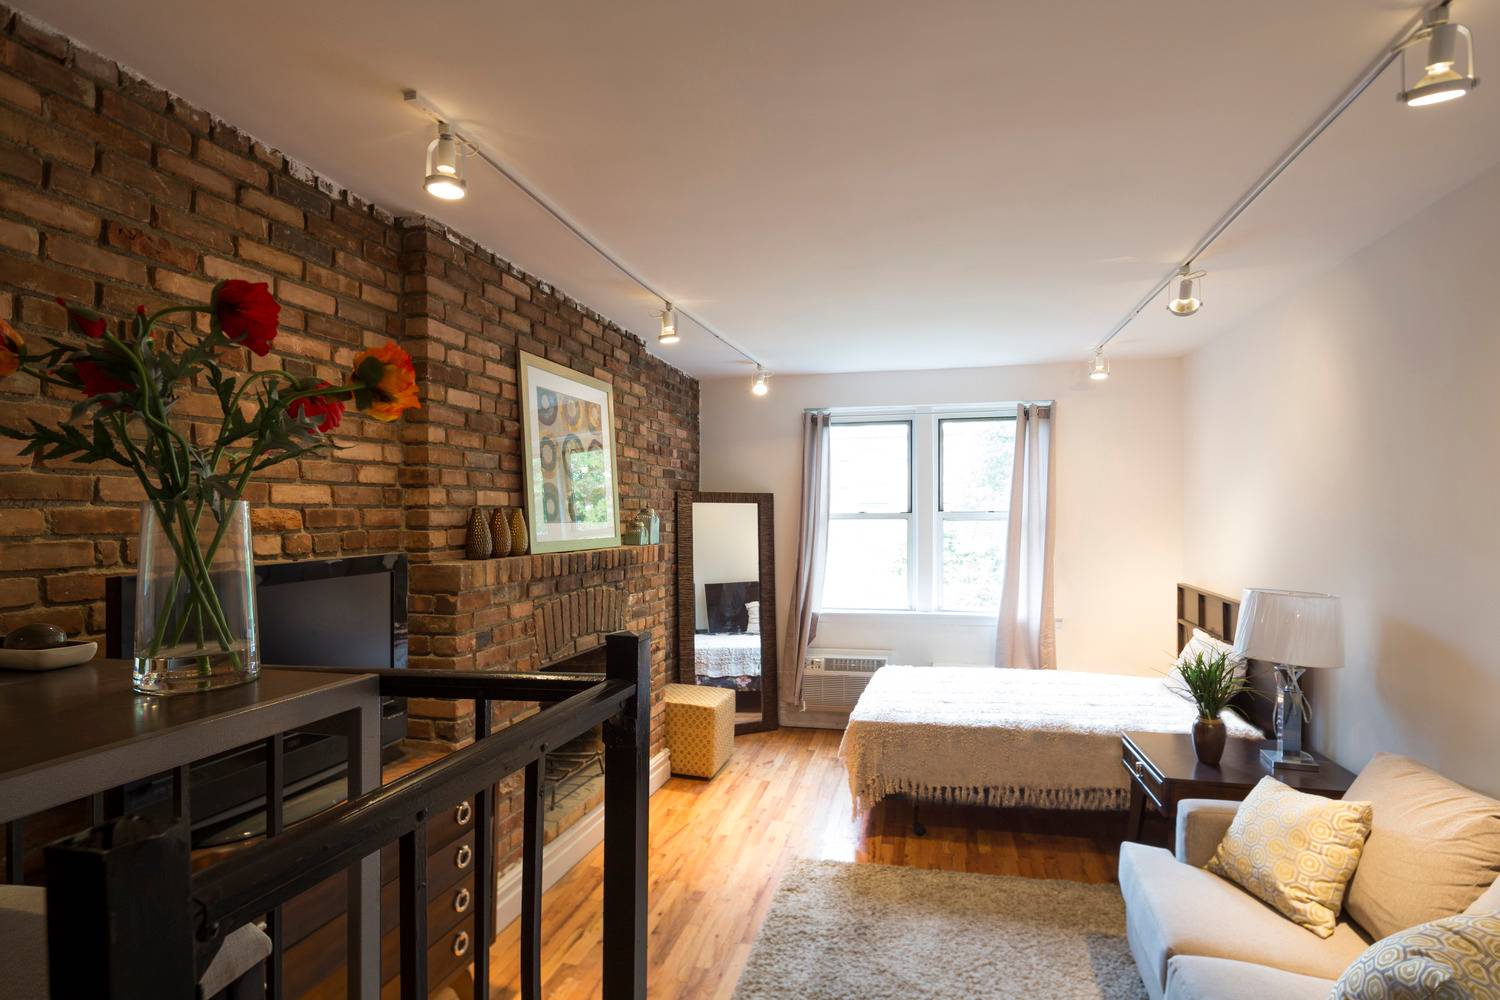 Beautiful  Loft  Conversion  In  Prime  Brooklyn  Heights  Location  -  NO  FEE  and   One  Month  Free  Rent!